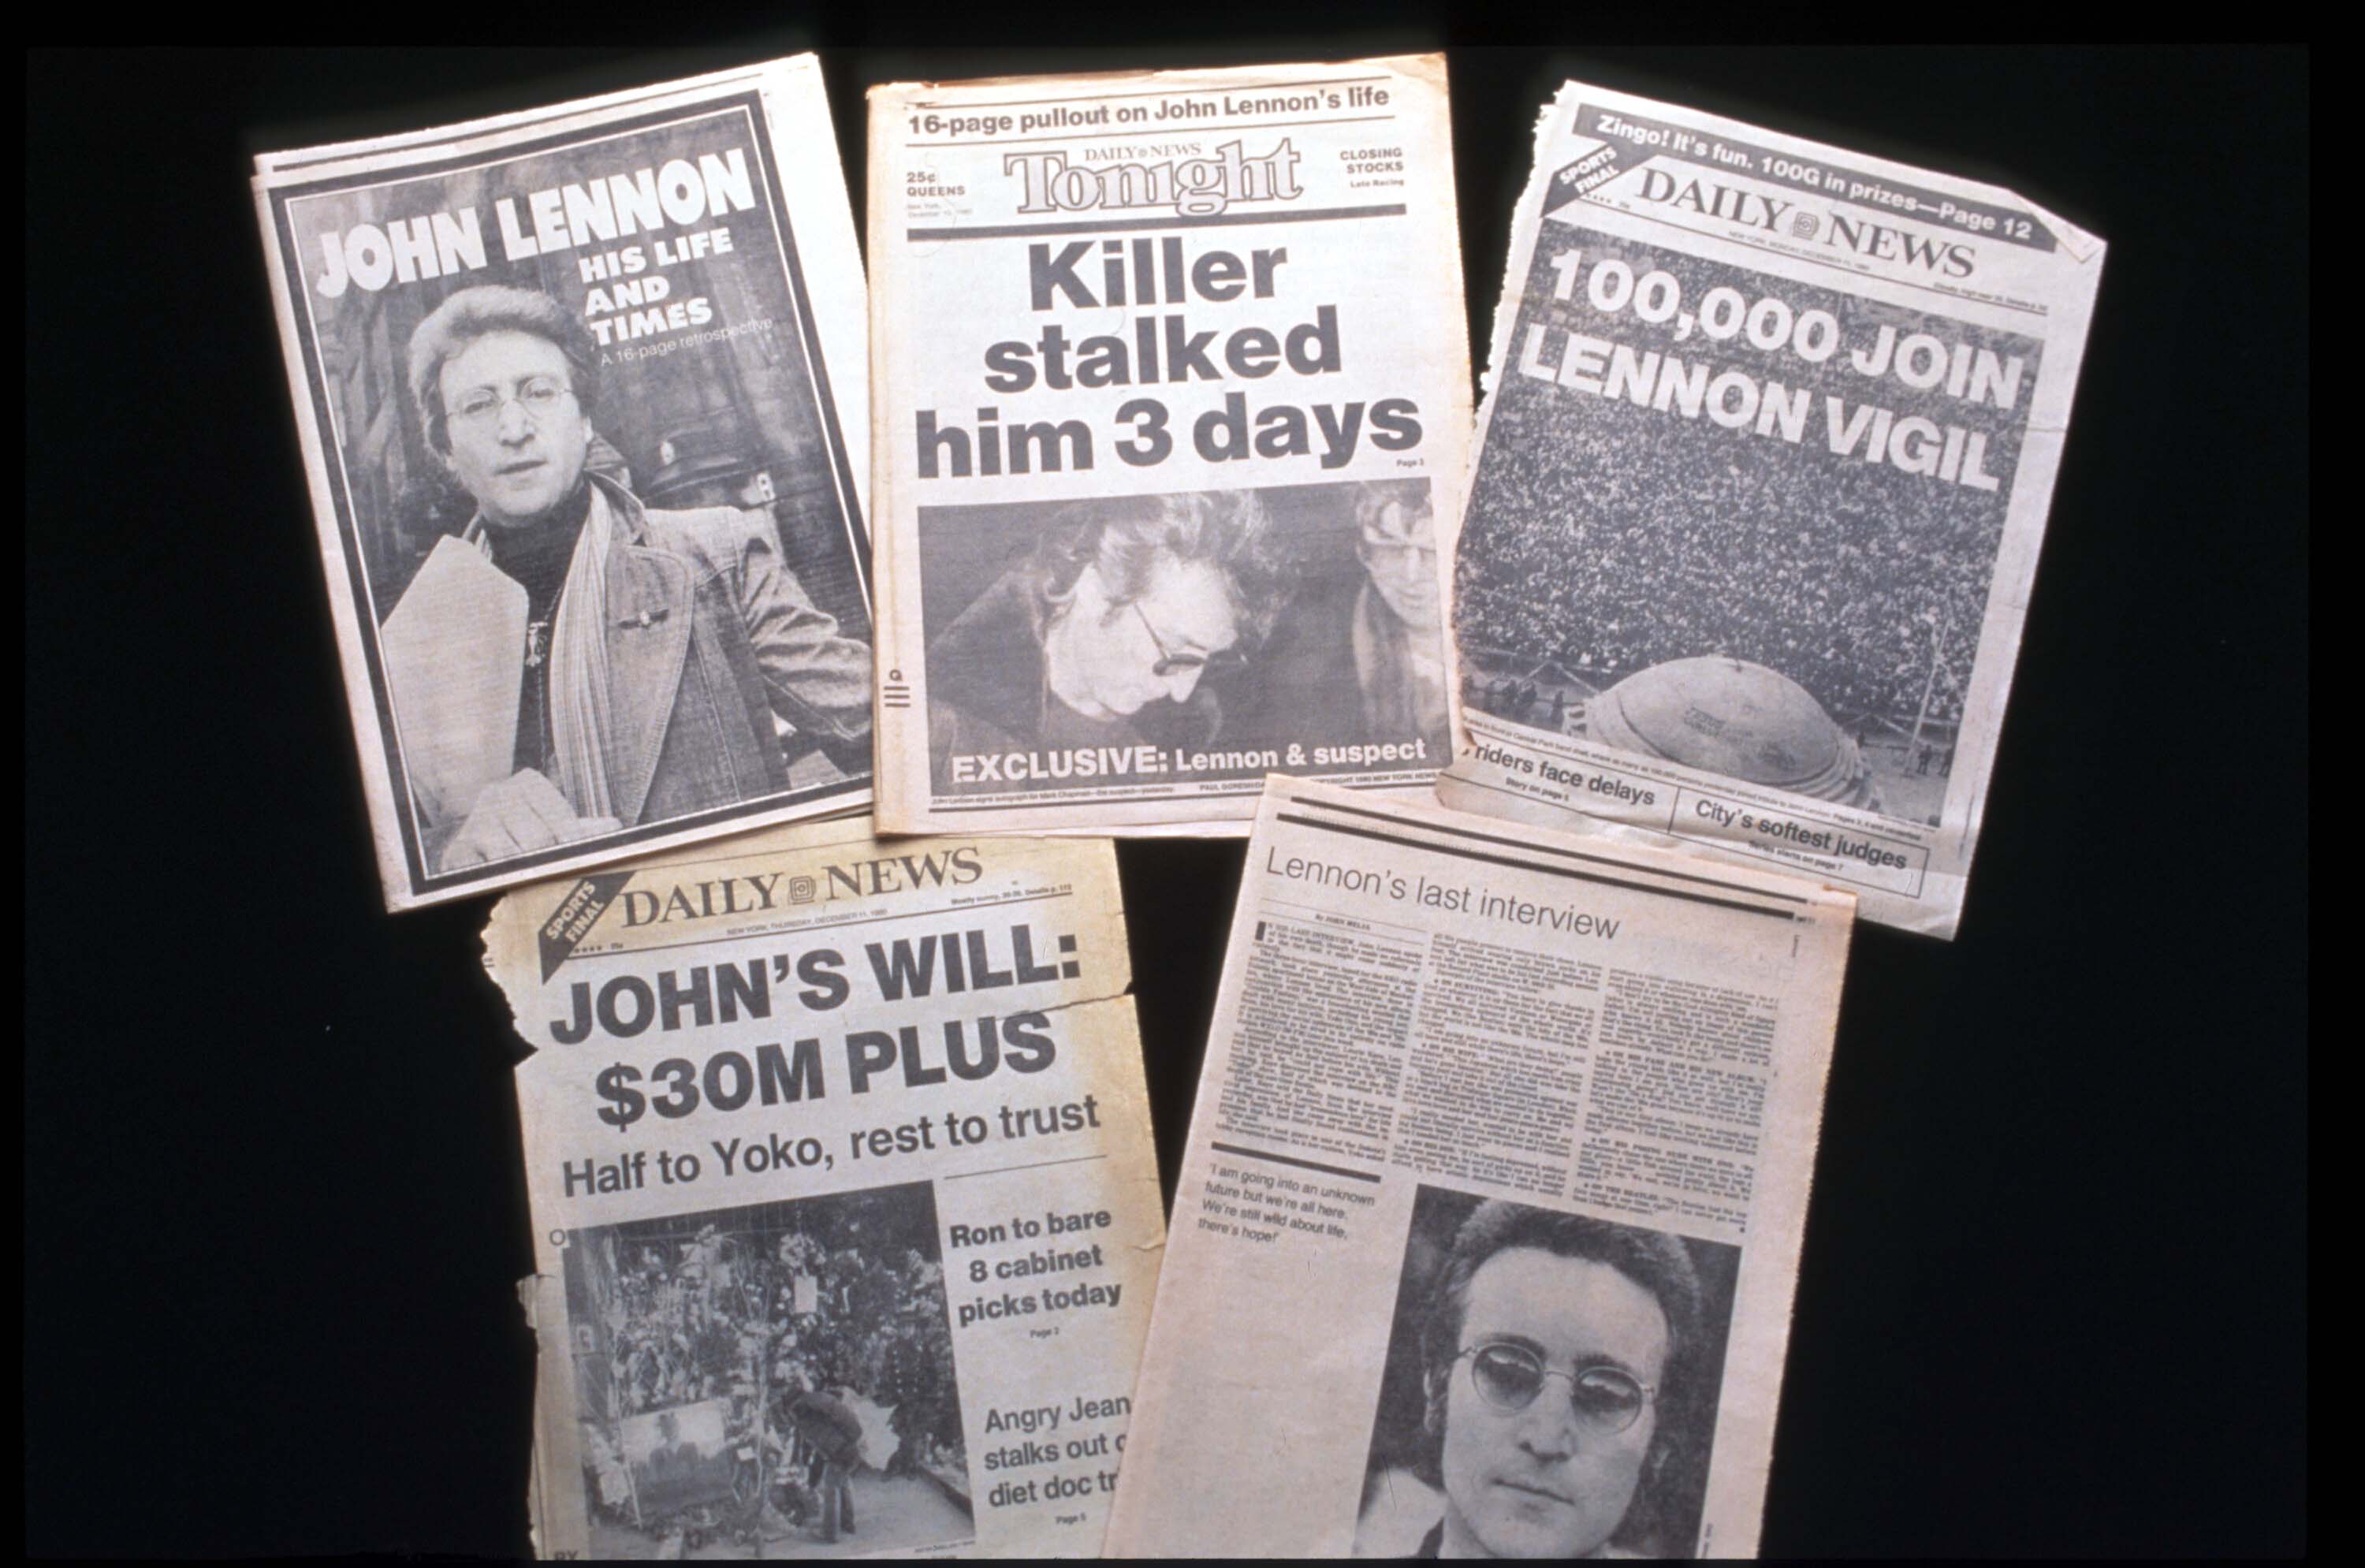 Newspapers announcing the death of former Beatle John Lennon, December 1980